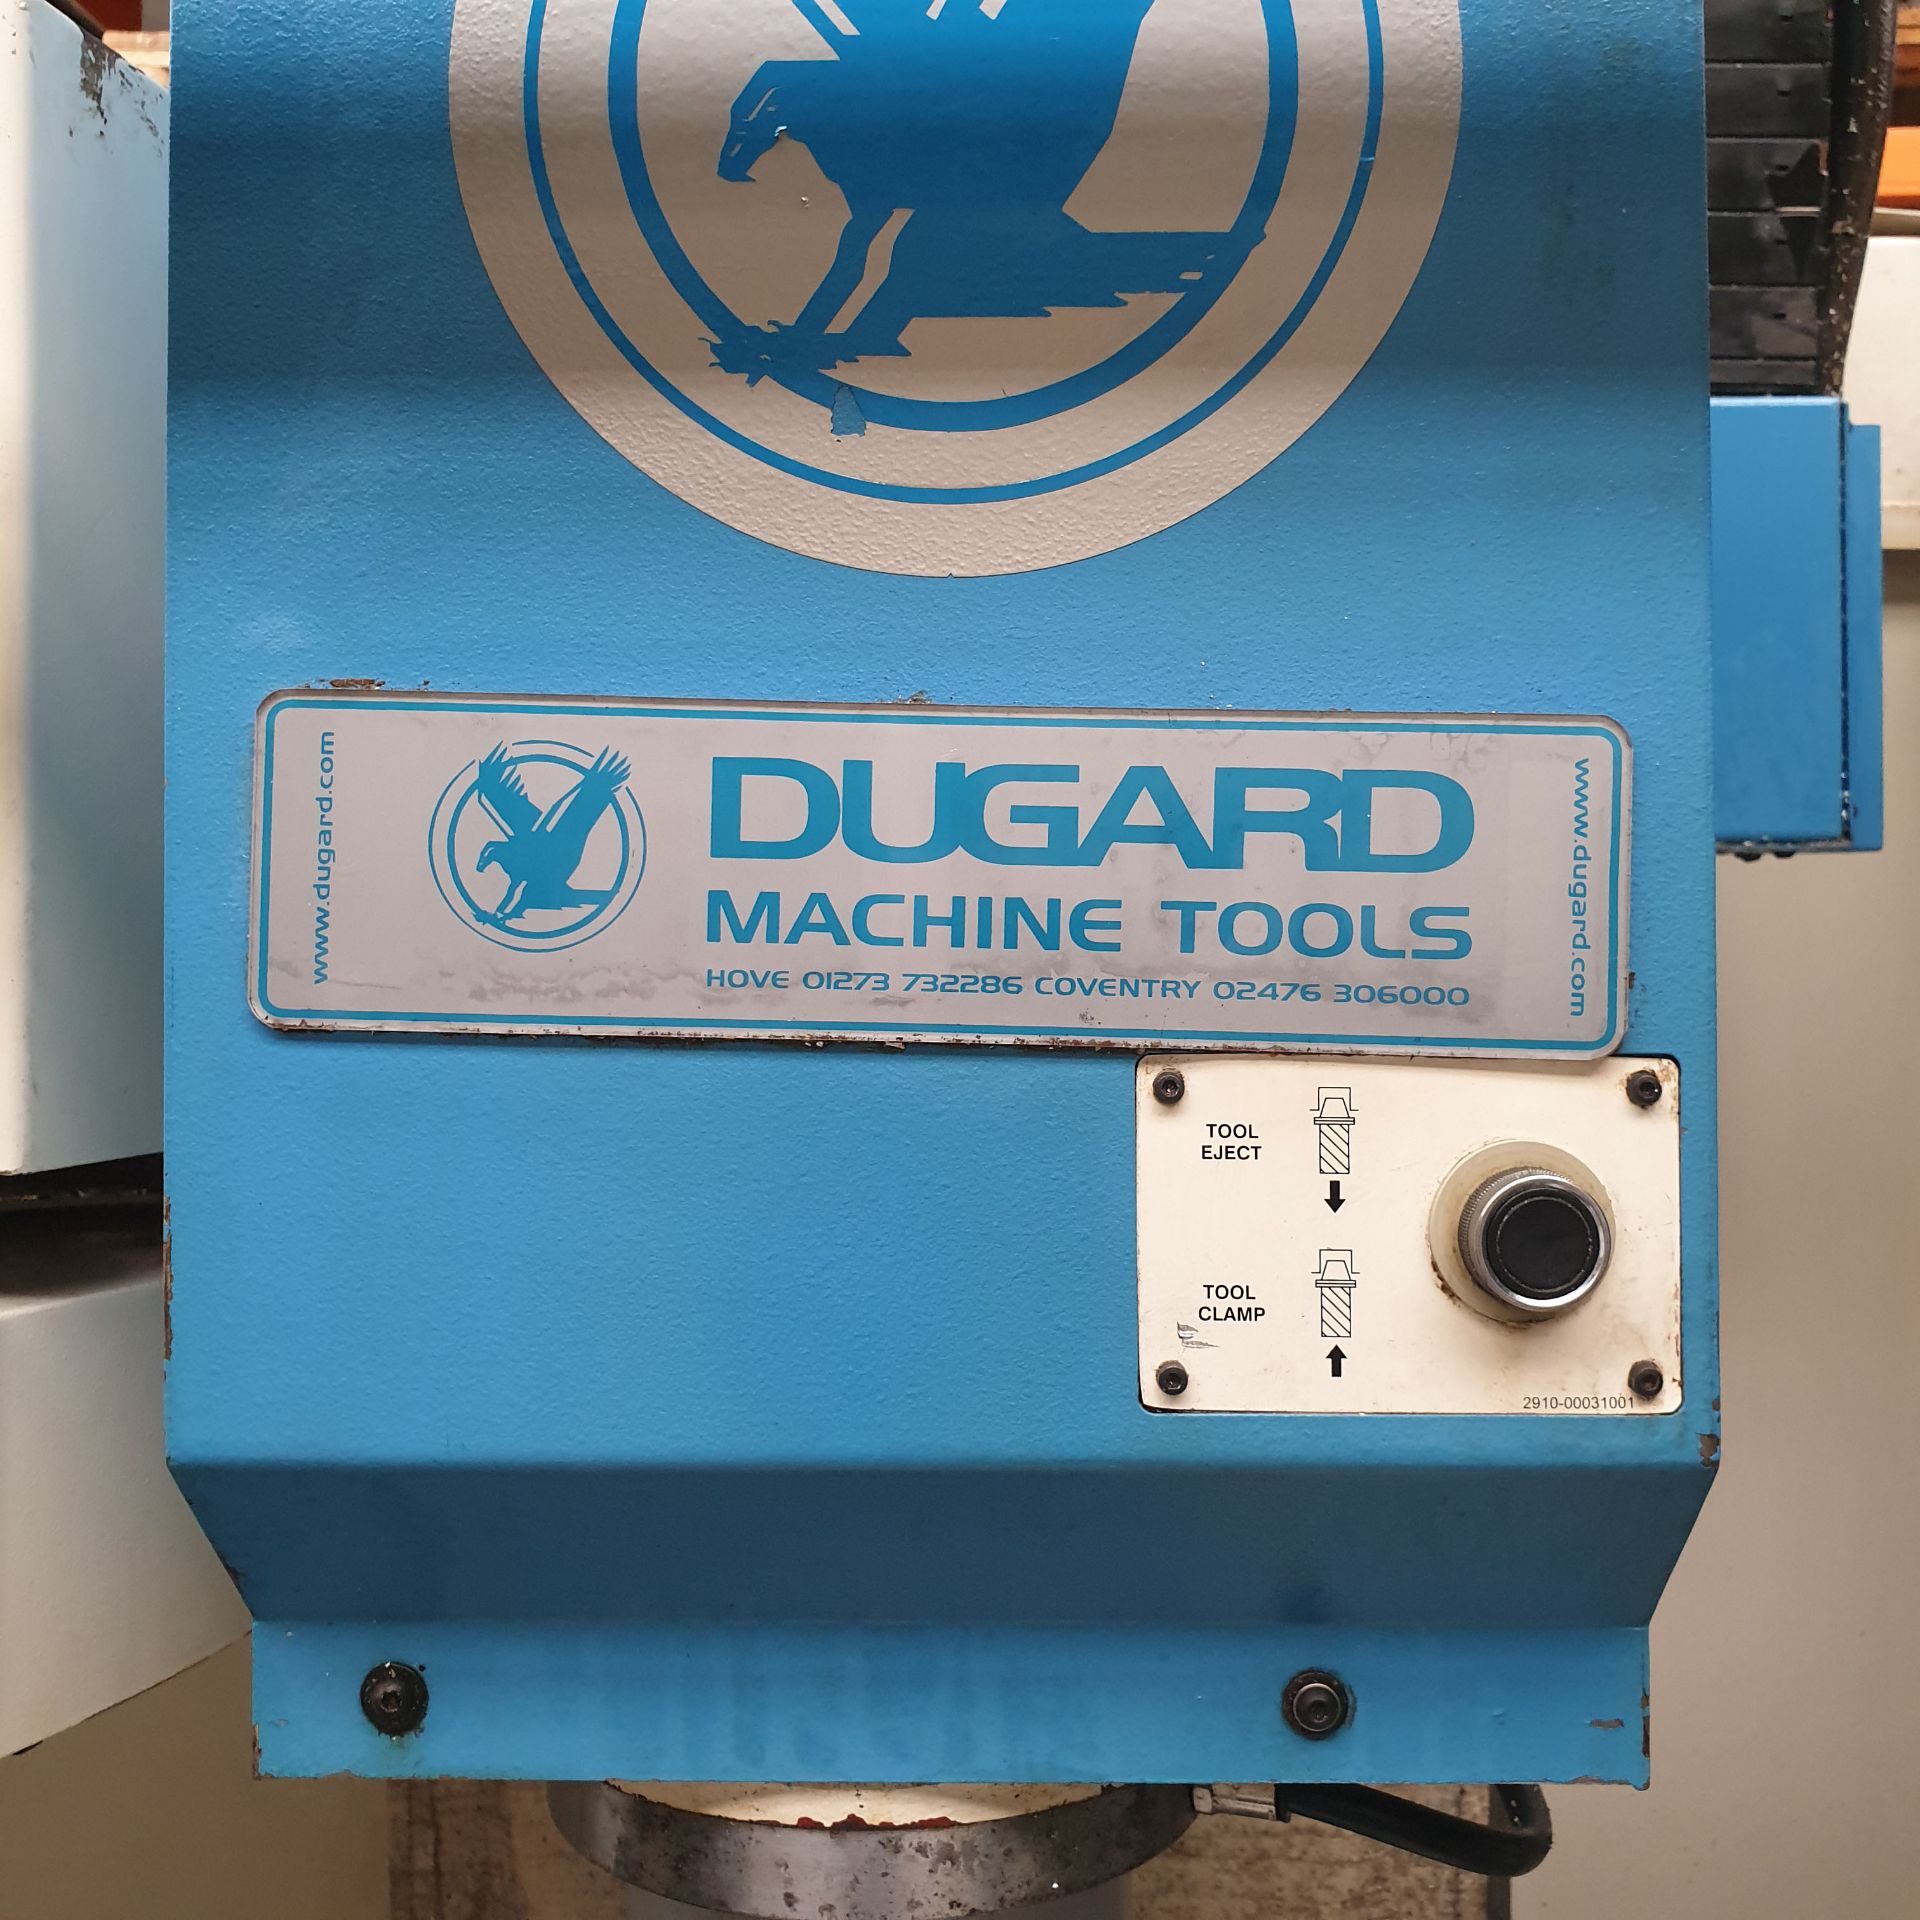 Dugard 1000 VMC Vertical Machining Centre. Spindle Taper BT40. Siemens Acramatic 2100 Control. - Image 8 of 9